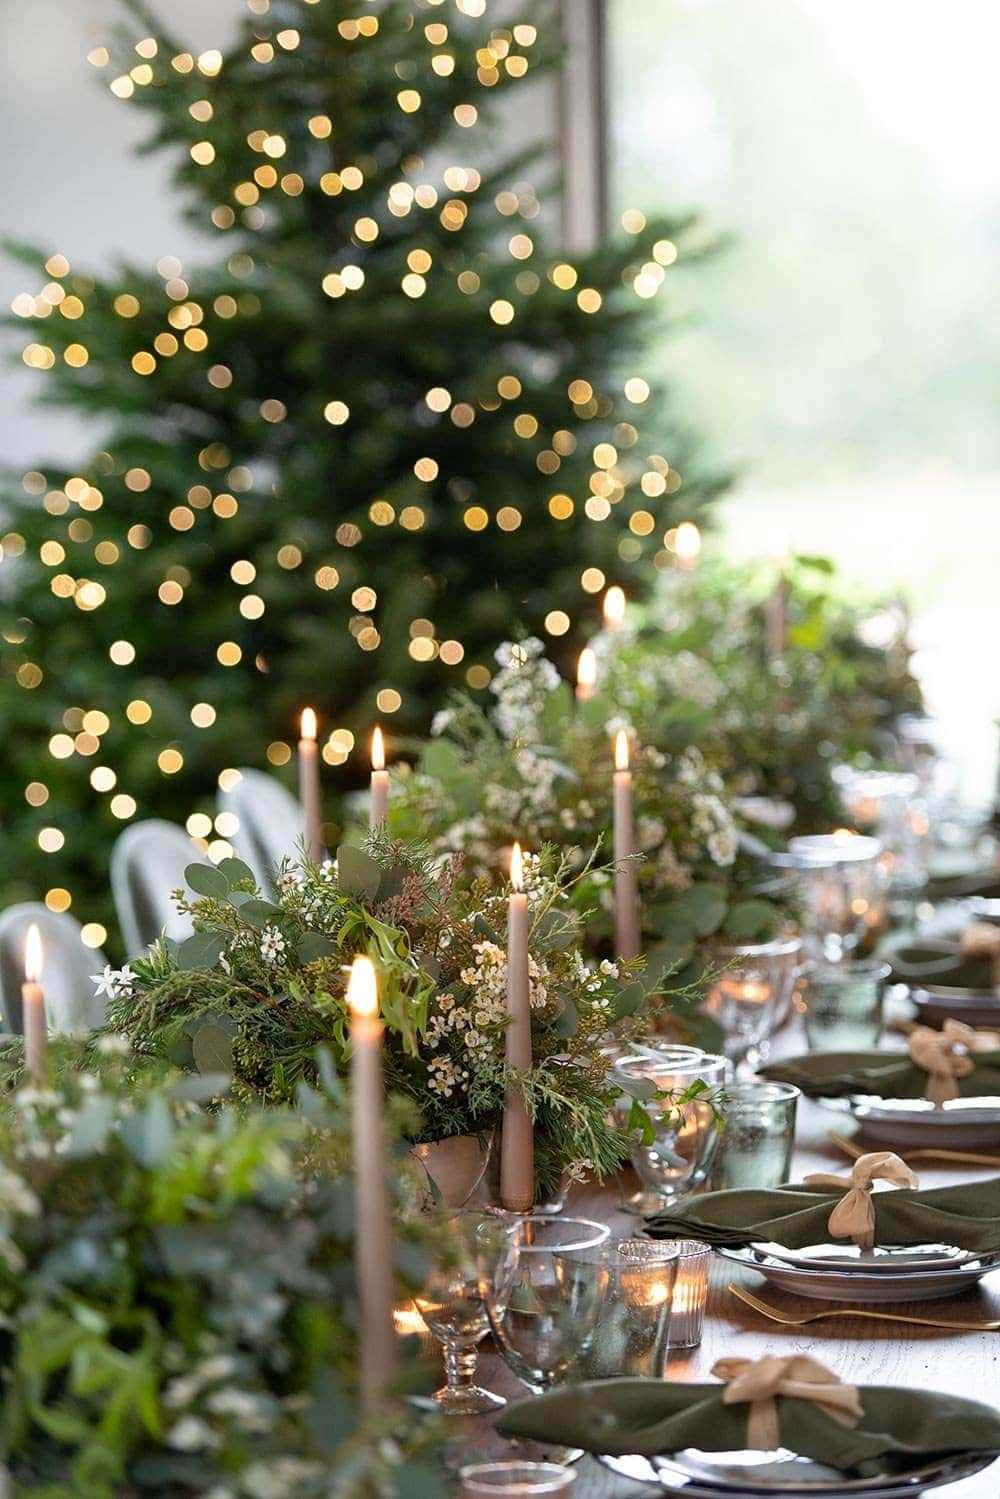 christmas centrepiece designed by phillippa craddock using seasonal evergreen foliage, aromatic herbs wax flowers, candles, tea light holders and 